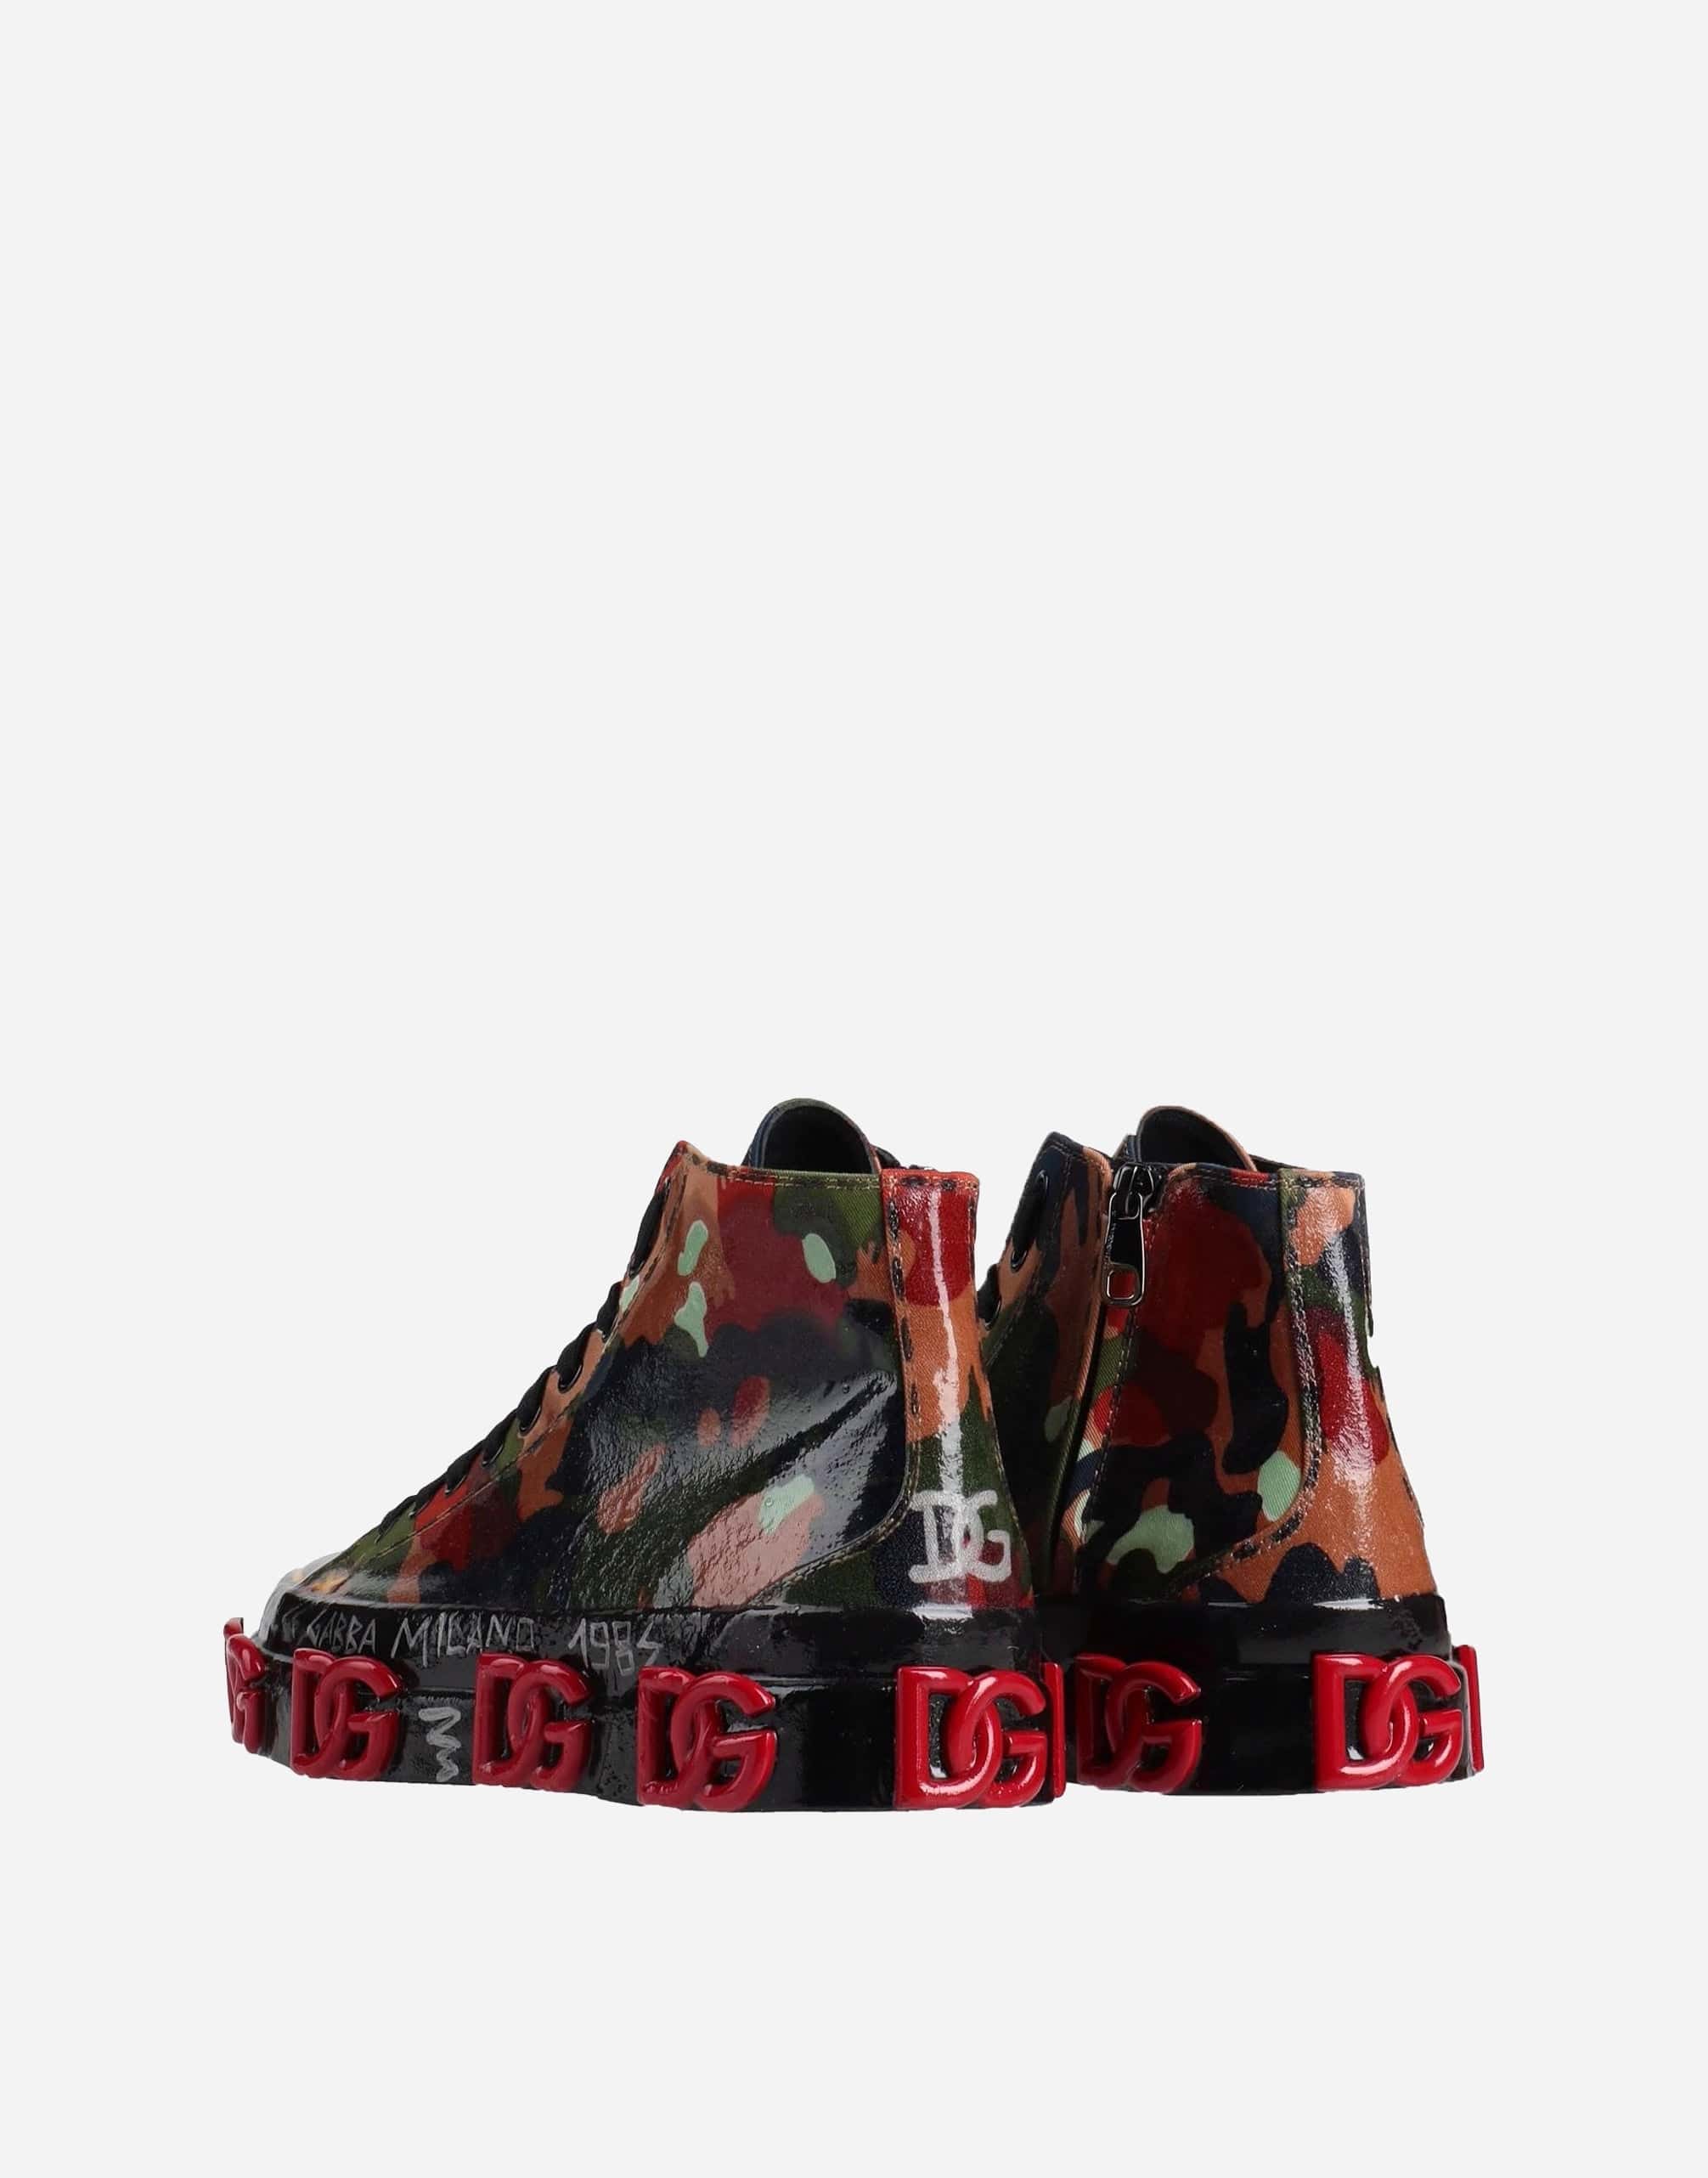 Dolce & Gabbana High-Top Camouflage Sneakers